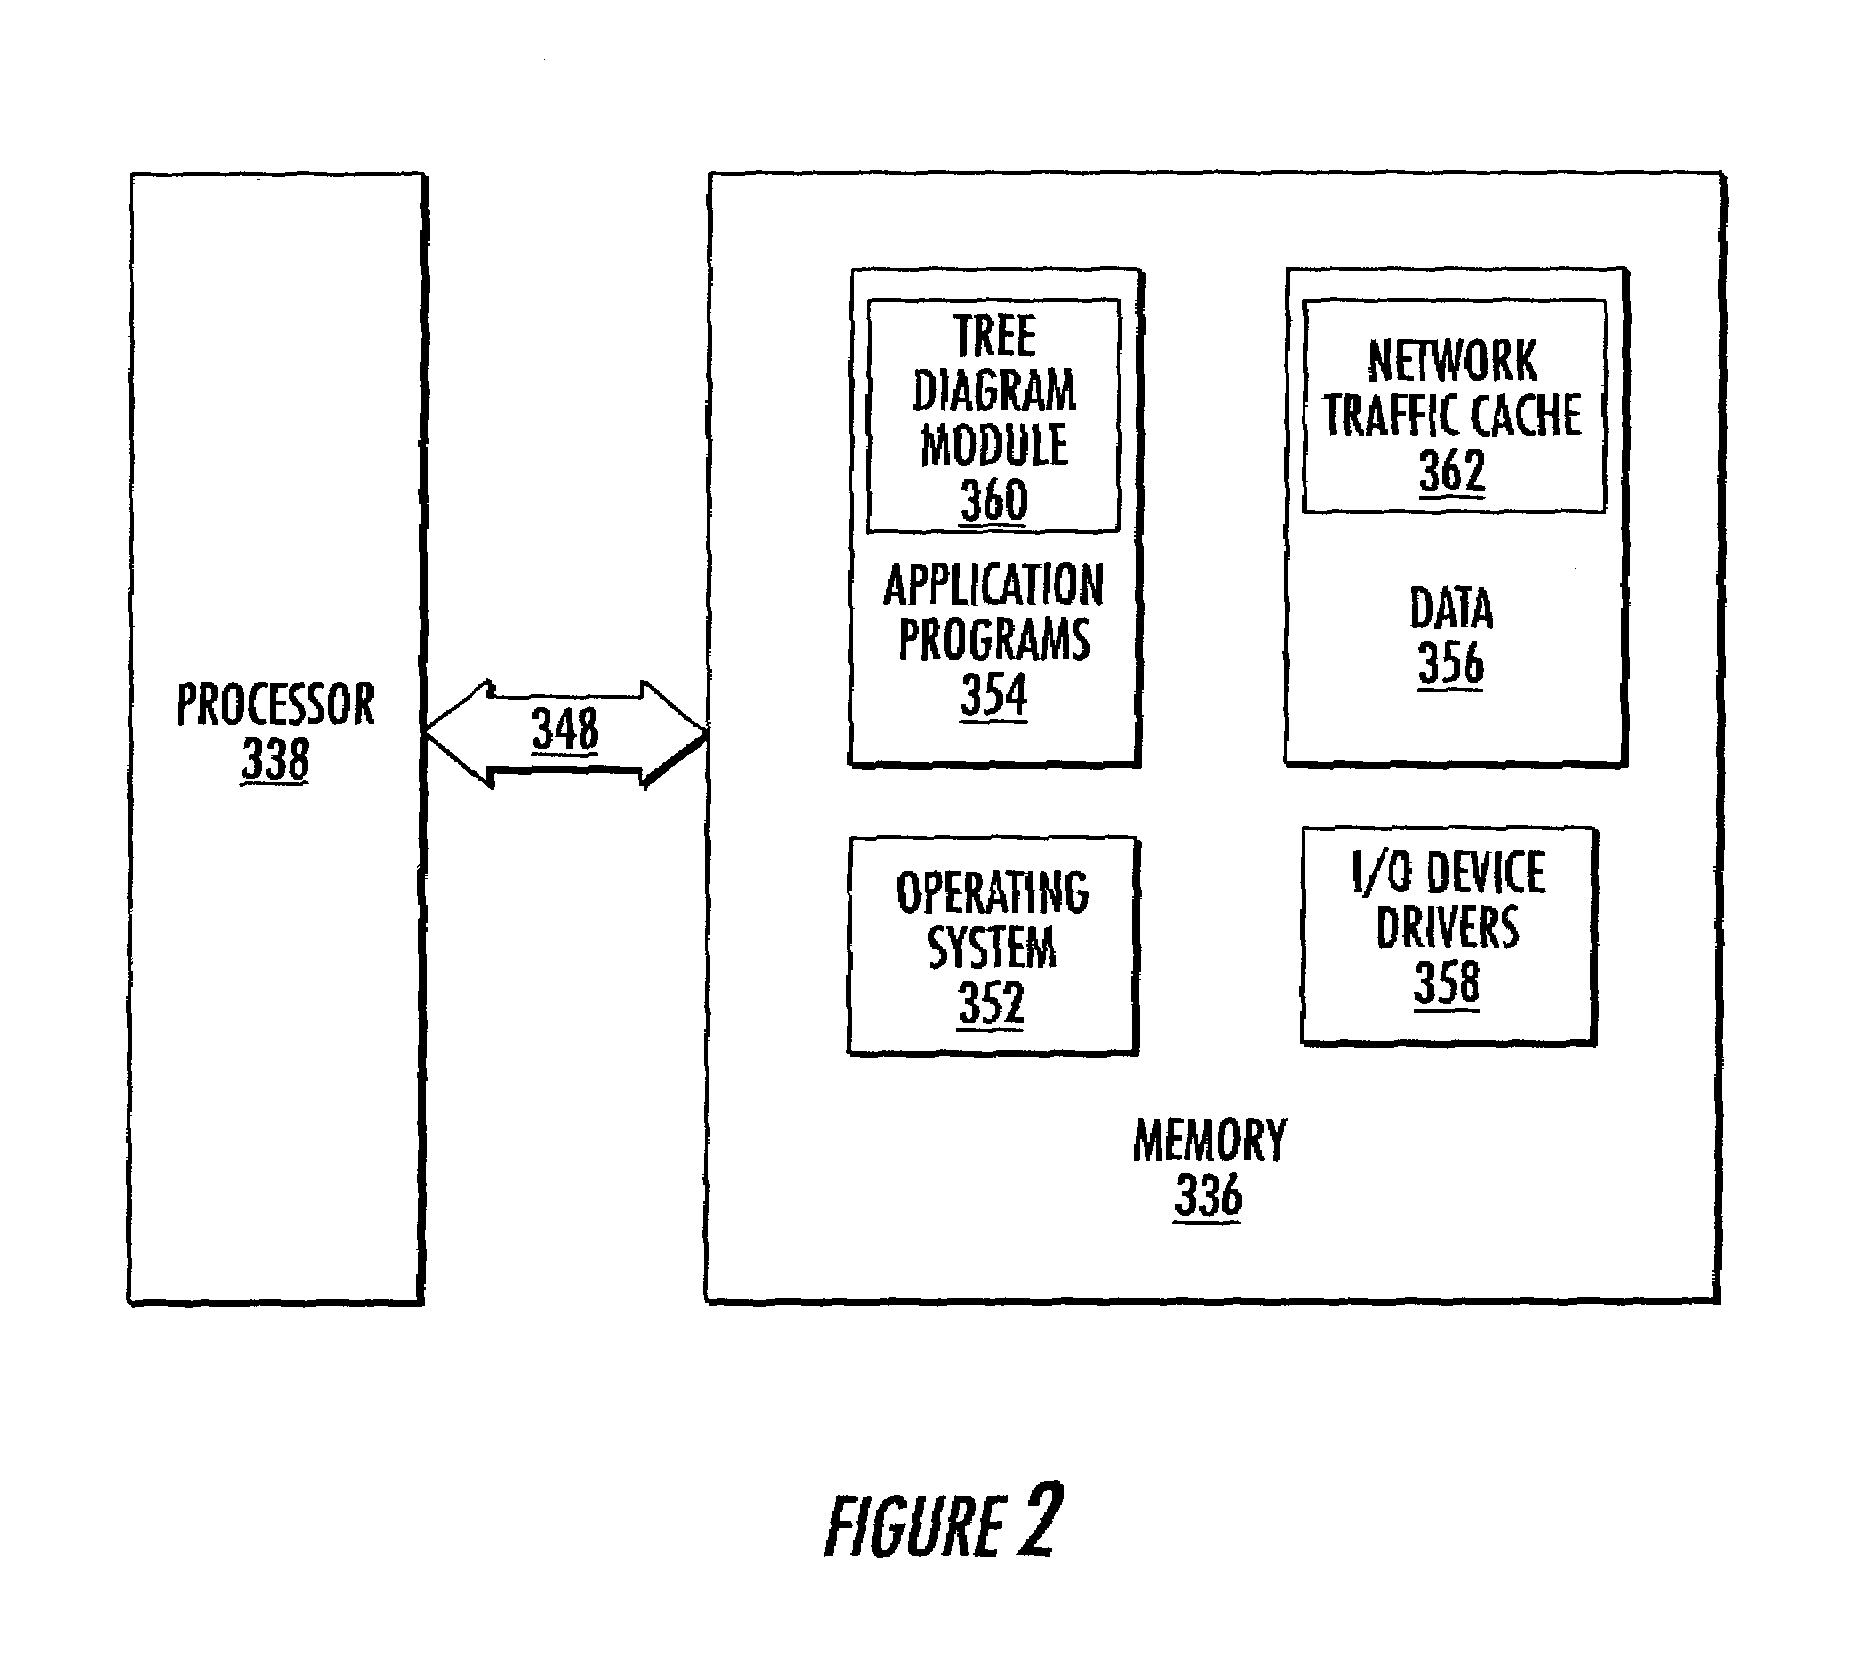 Methods, systems and computer program products for controlling tree diagram graphical user interfaces and/or for partially collapsing tree diagrams